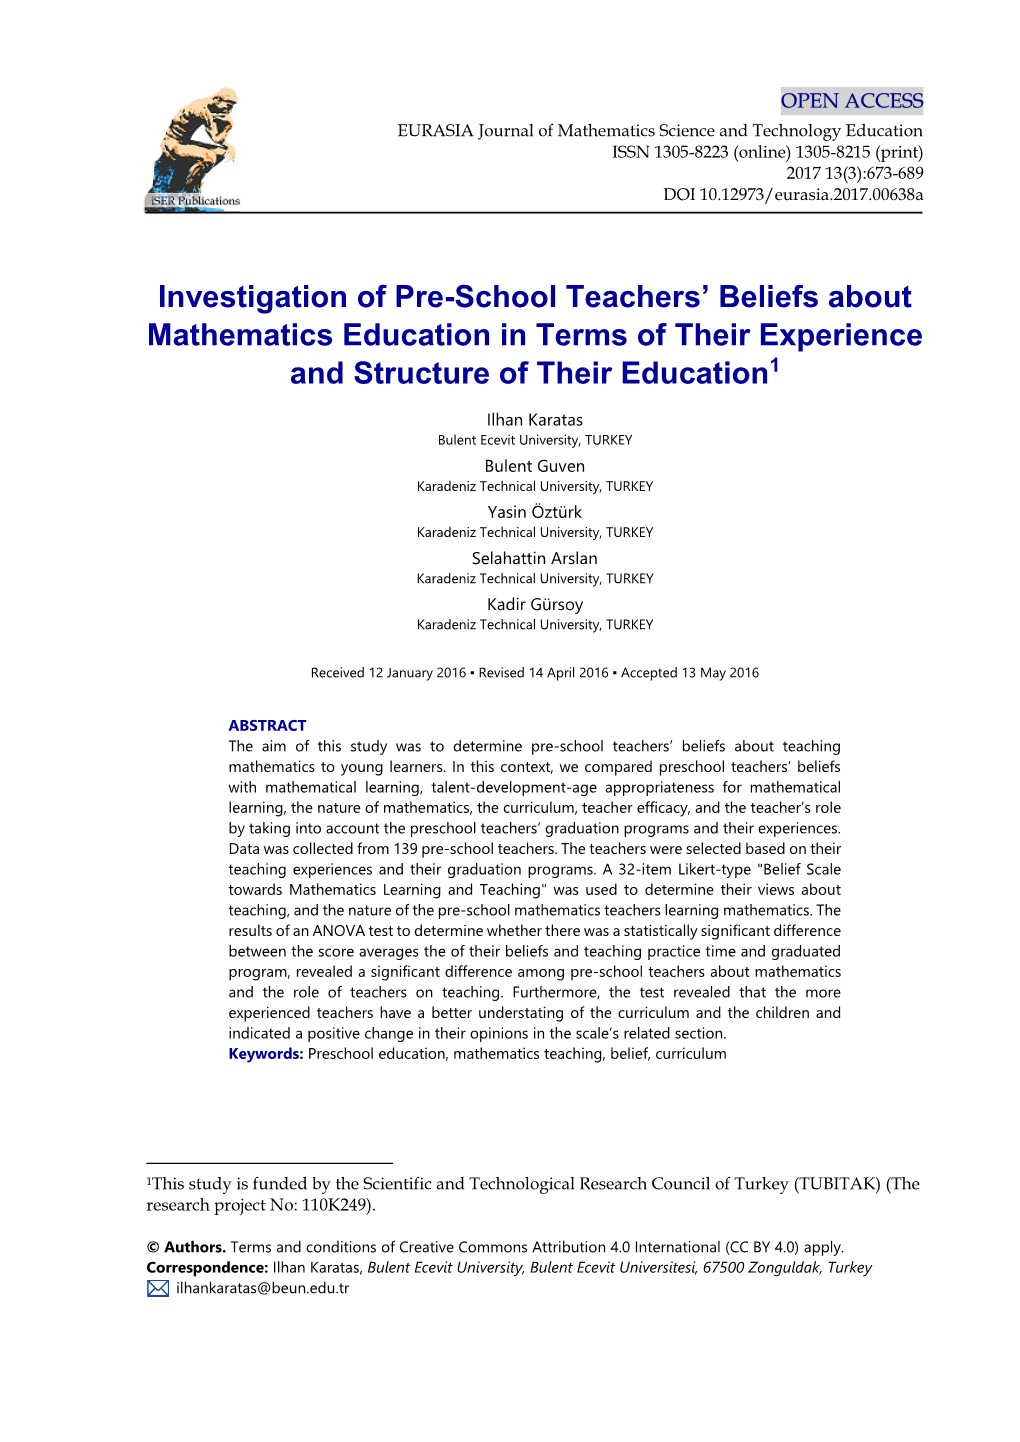 Investigation of Pre-School Teachers' Beliefs About Mathematics Education in Terms of Their Experience and Structure of Their